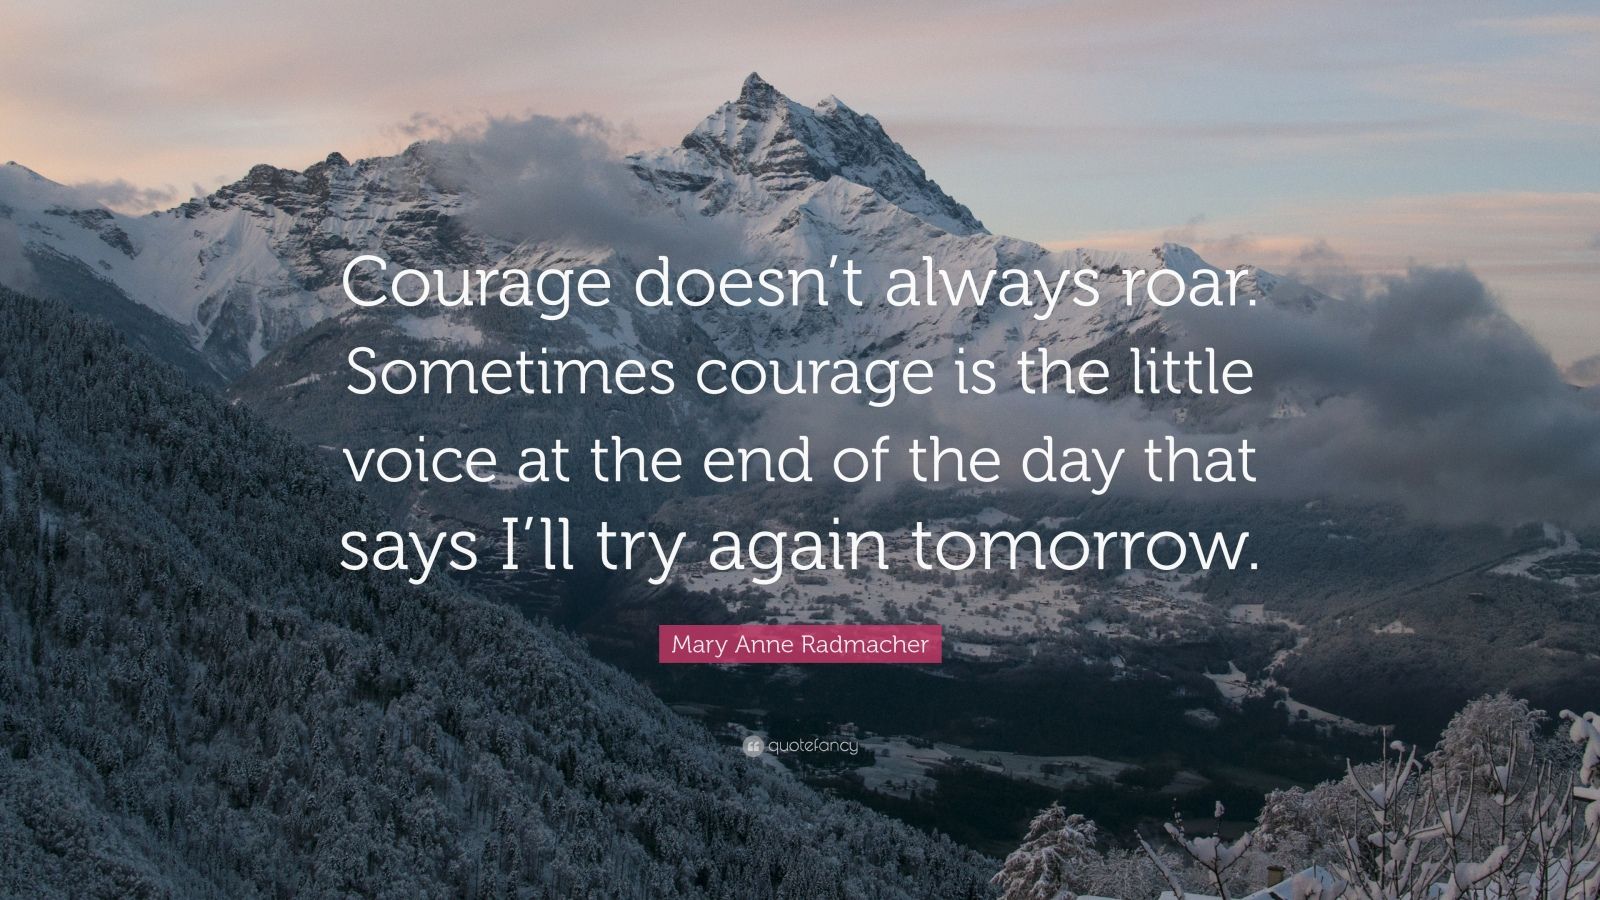 Mary Anne Radmacher Quote: “Courage doesn’t always roar. Sometimes courage is the little voice